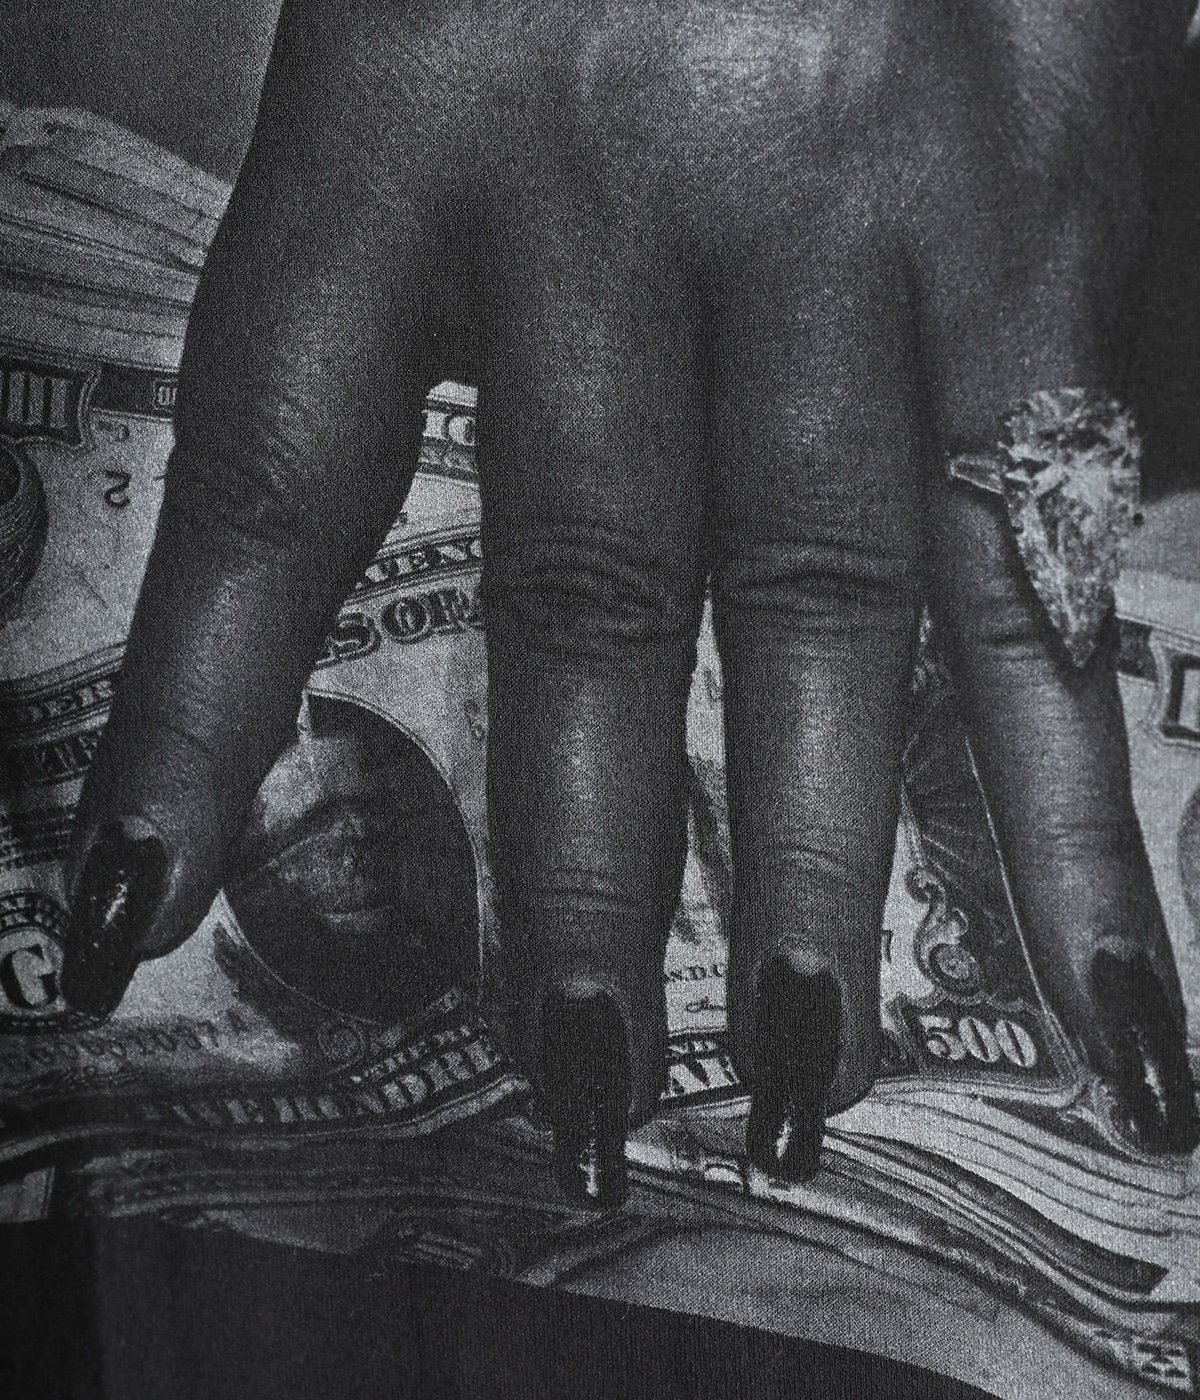 40/2 Short Sleeve Fat Hand and Dollars(BY Helmut Newton) | THE